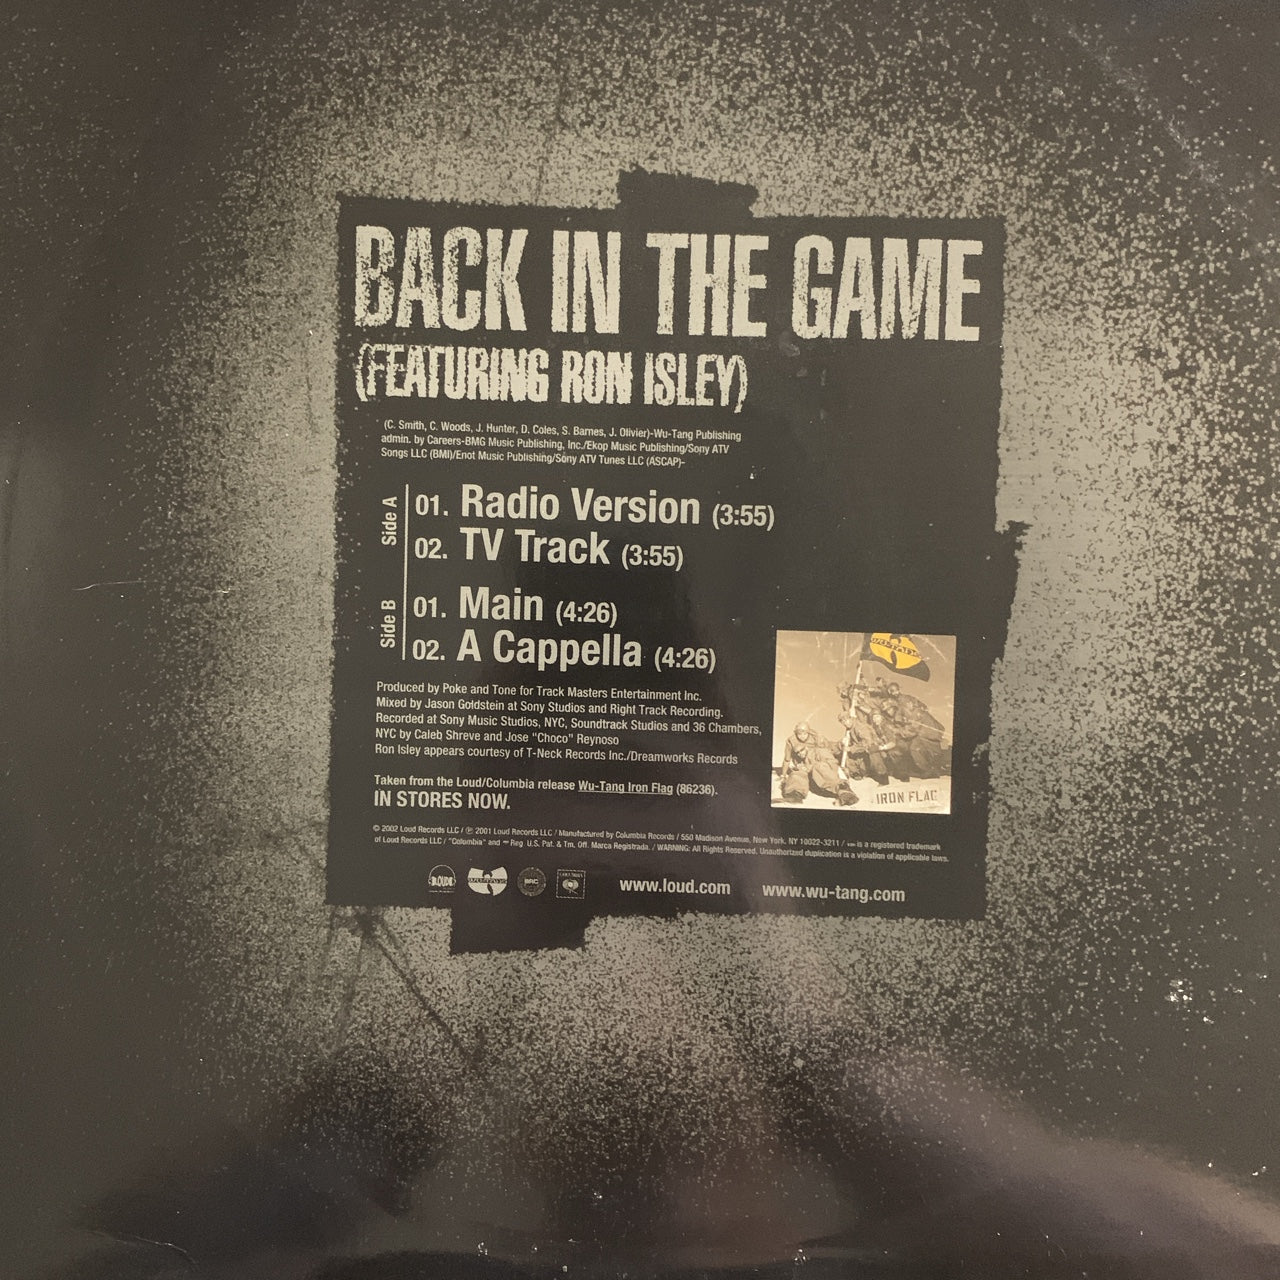 Wu-Tang Clan “Back In The Game” – Classic wax records